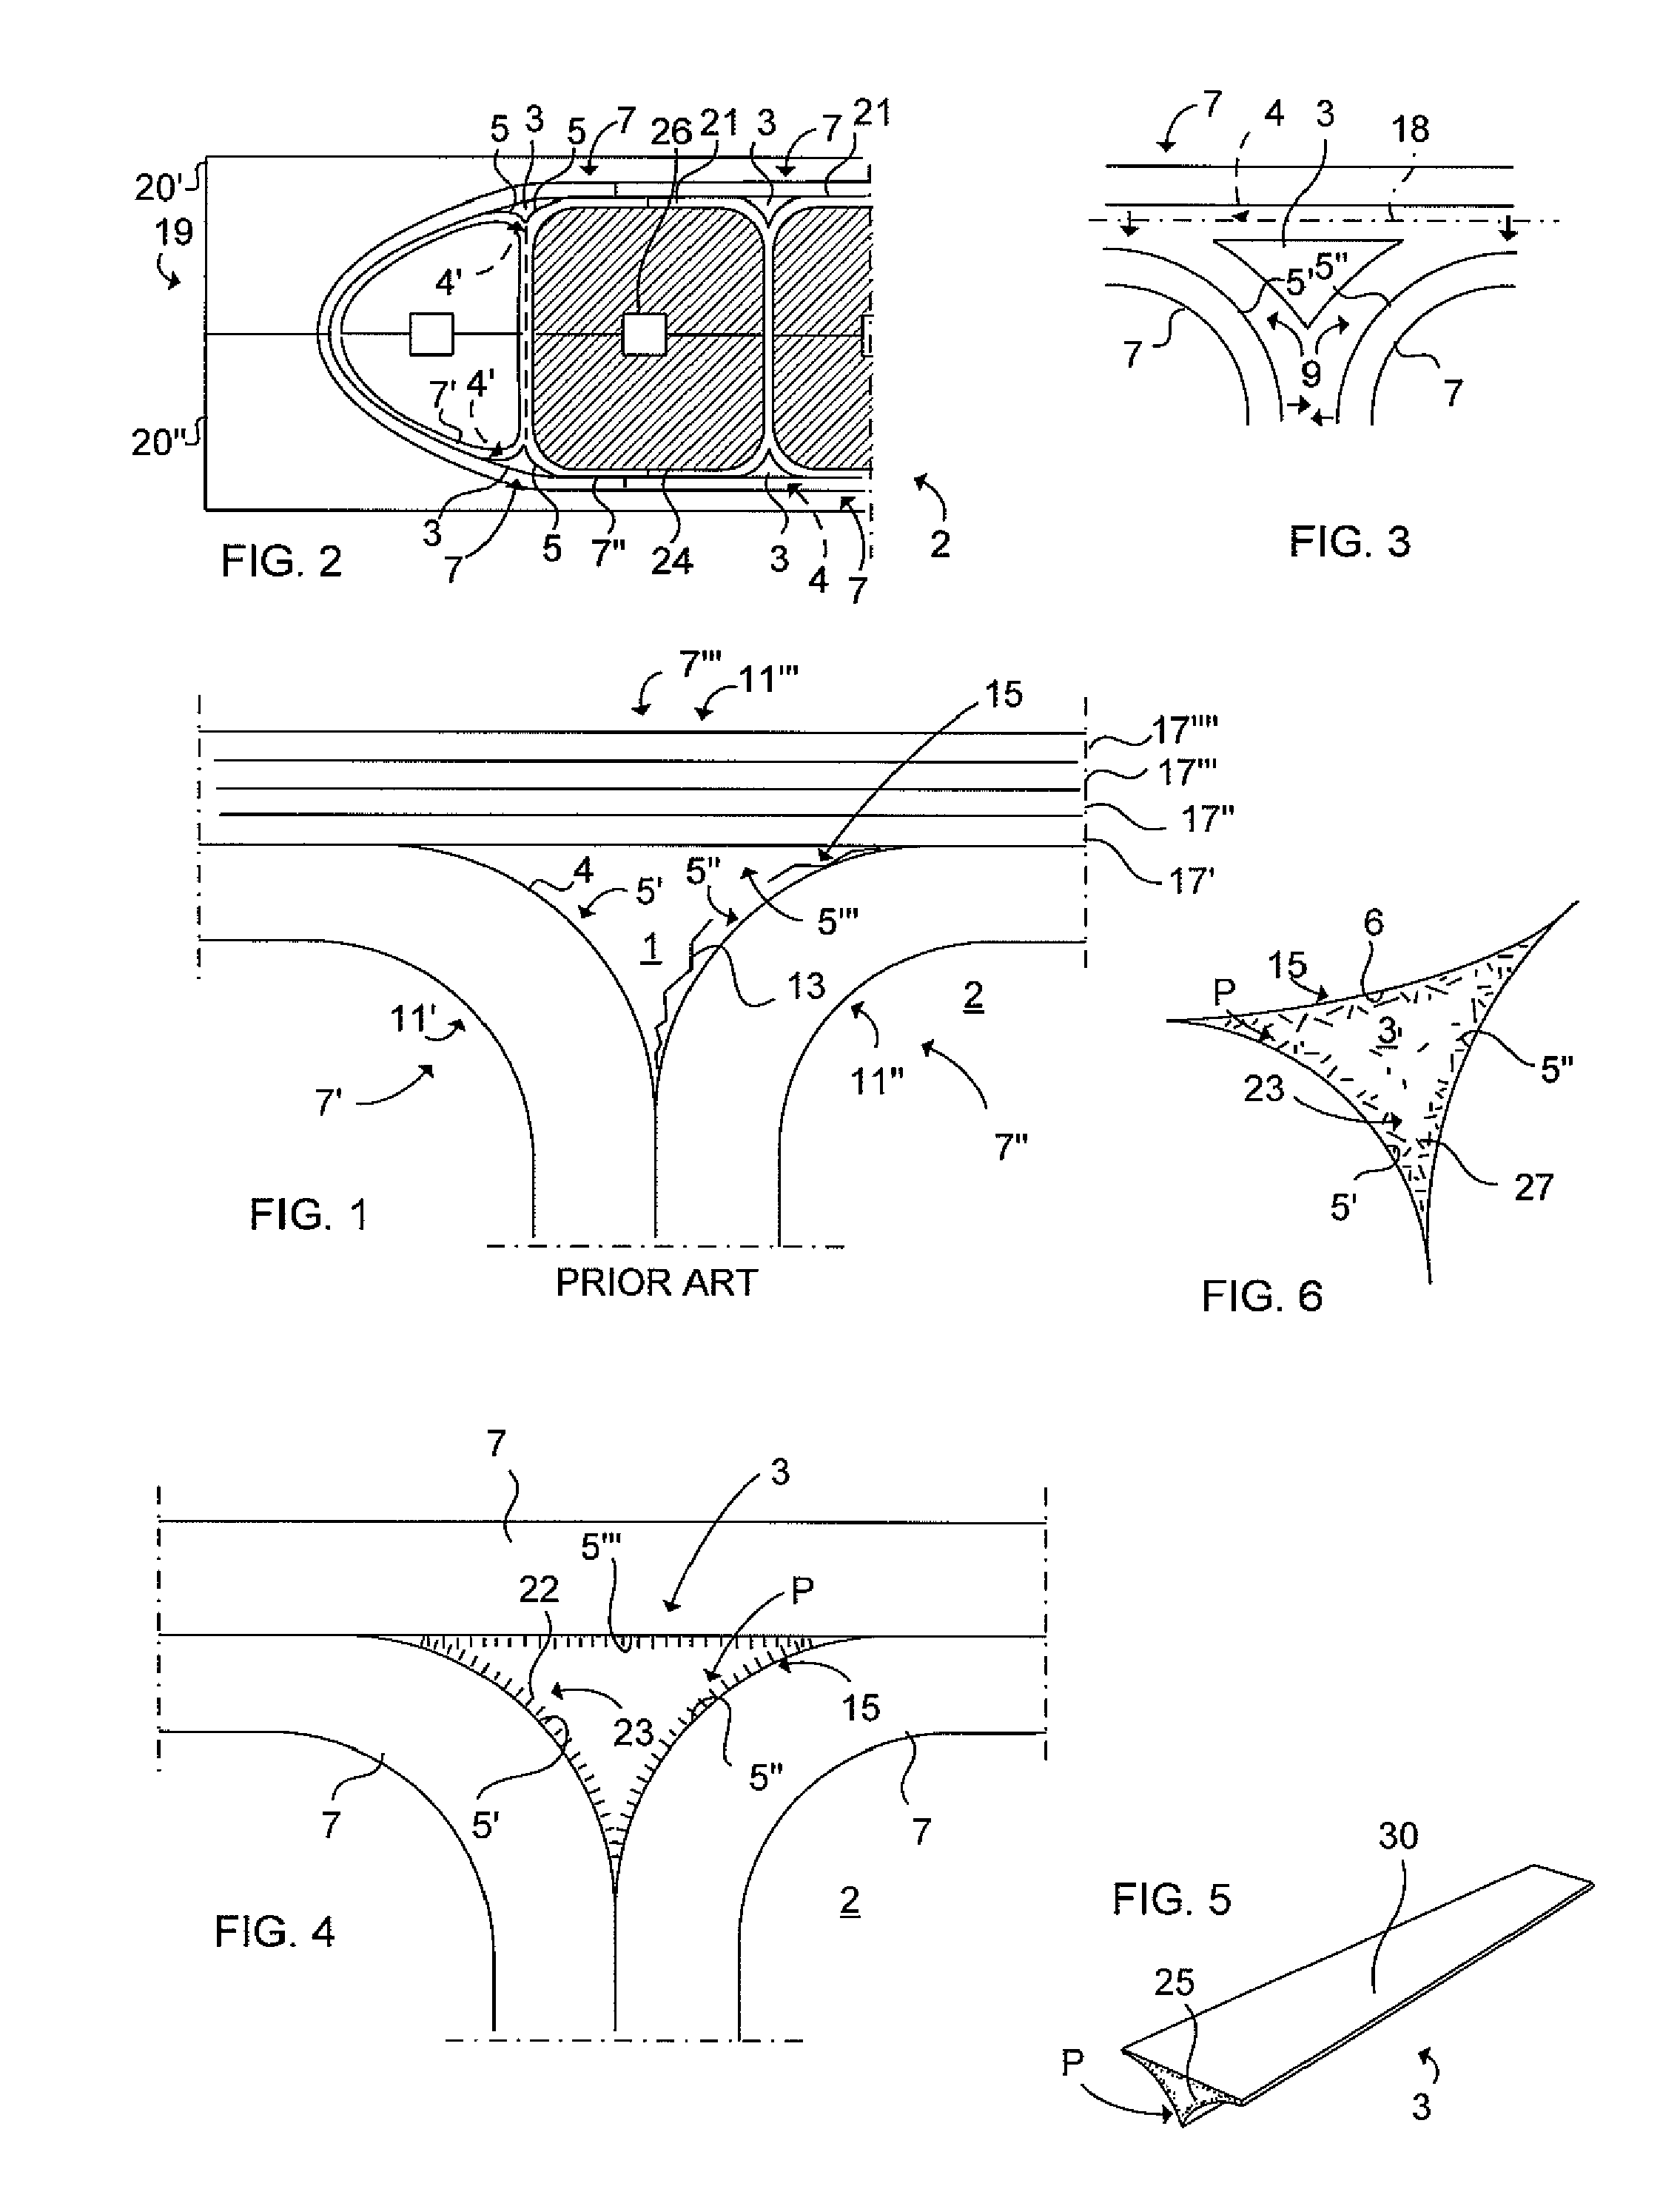 Nano-reinforced radius filler for an aircraft structure and a method of producing an aircraft structure comprising such filler